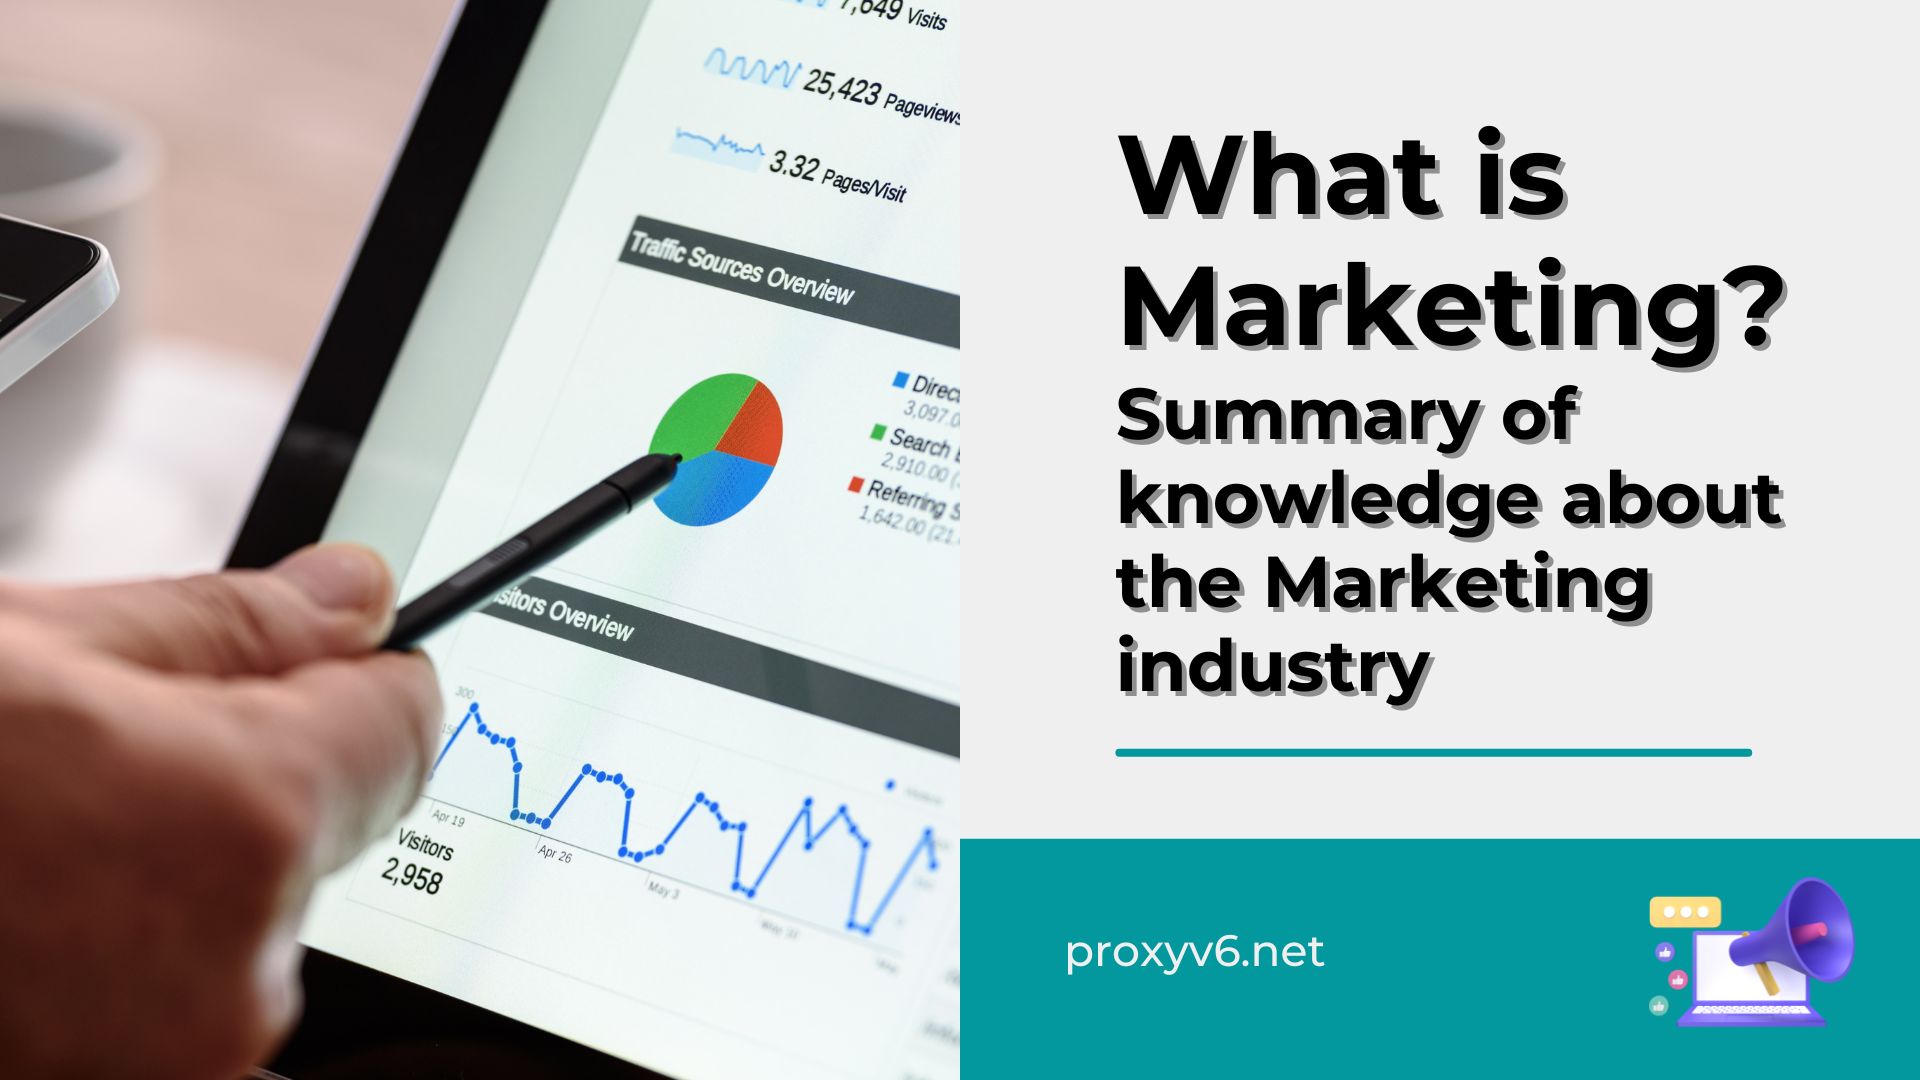 What is Marketing? Summary of knowledge about the Marketing industry